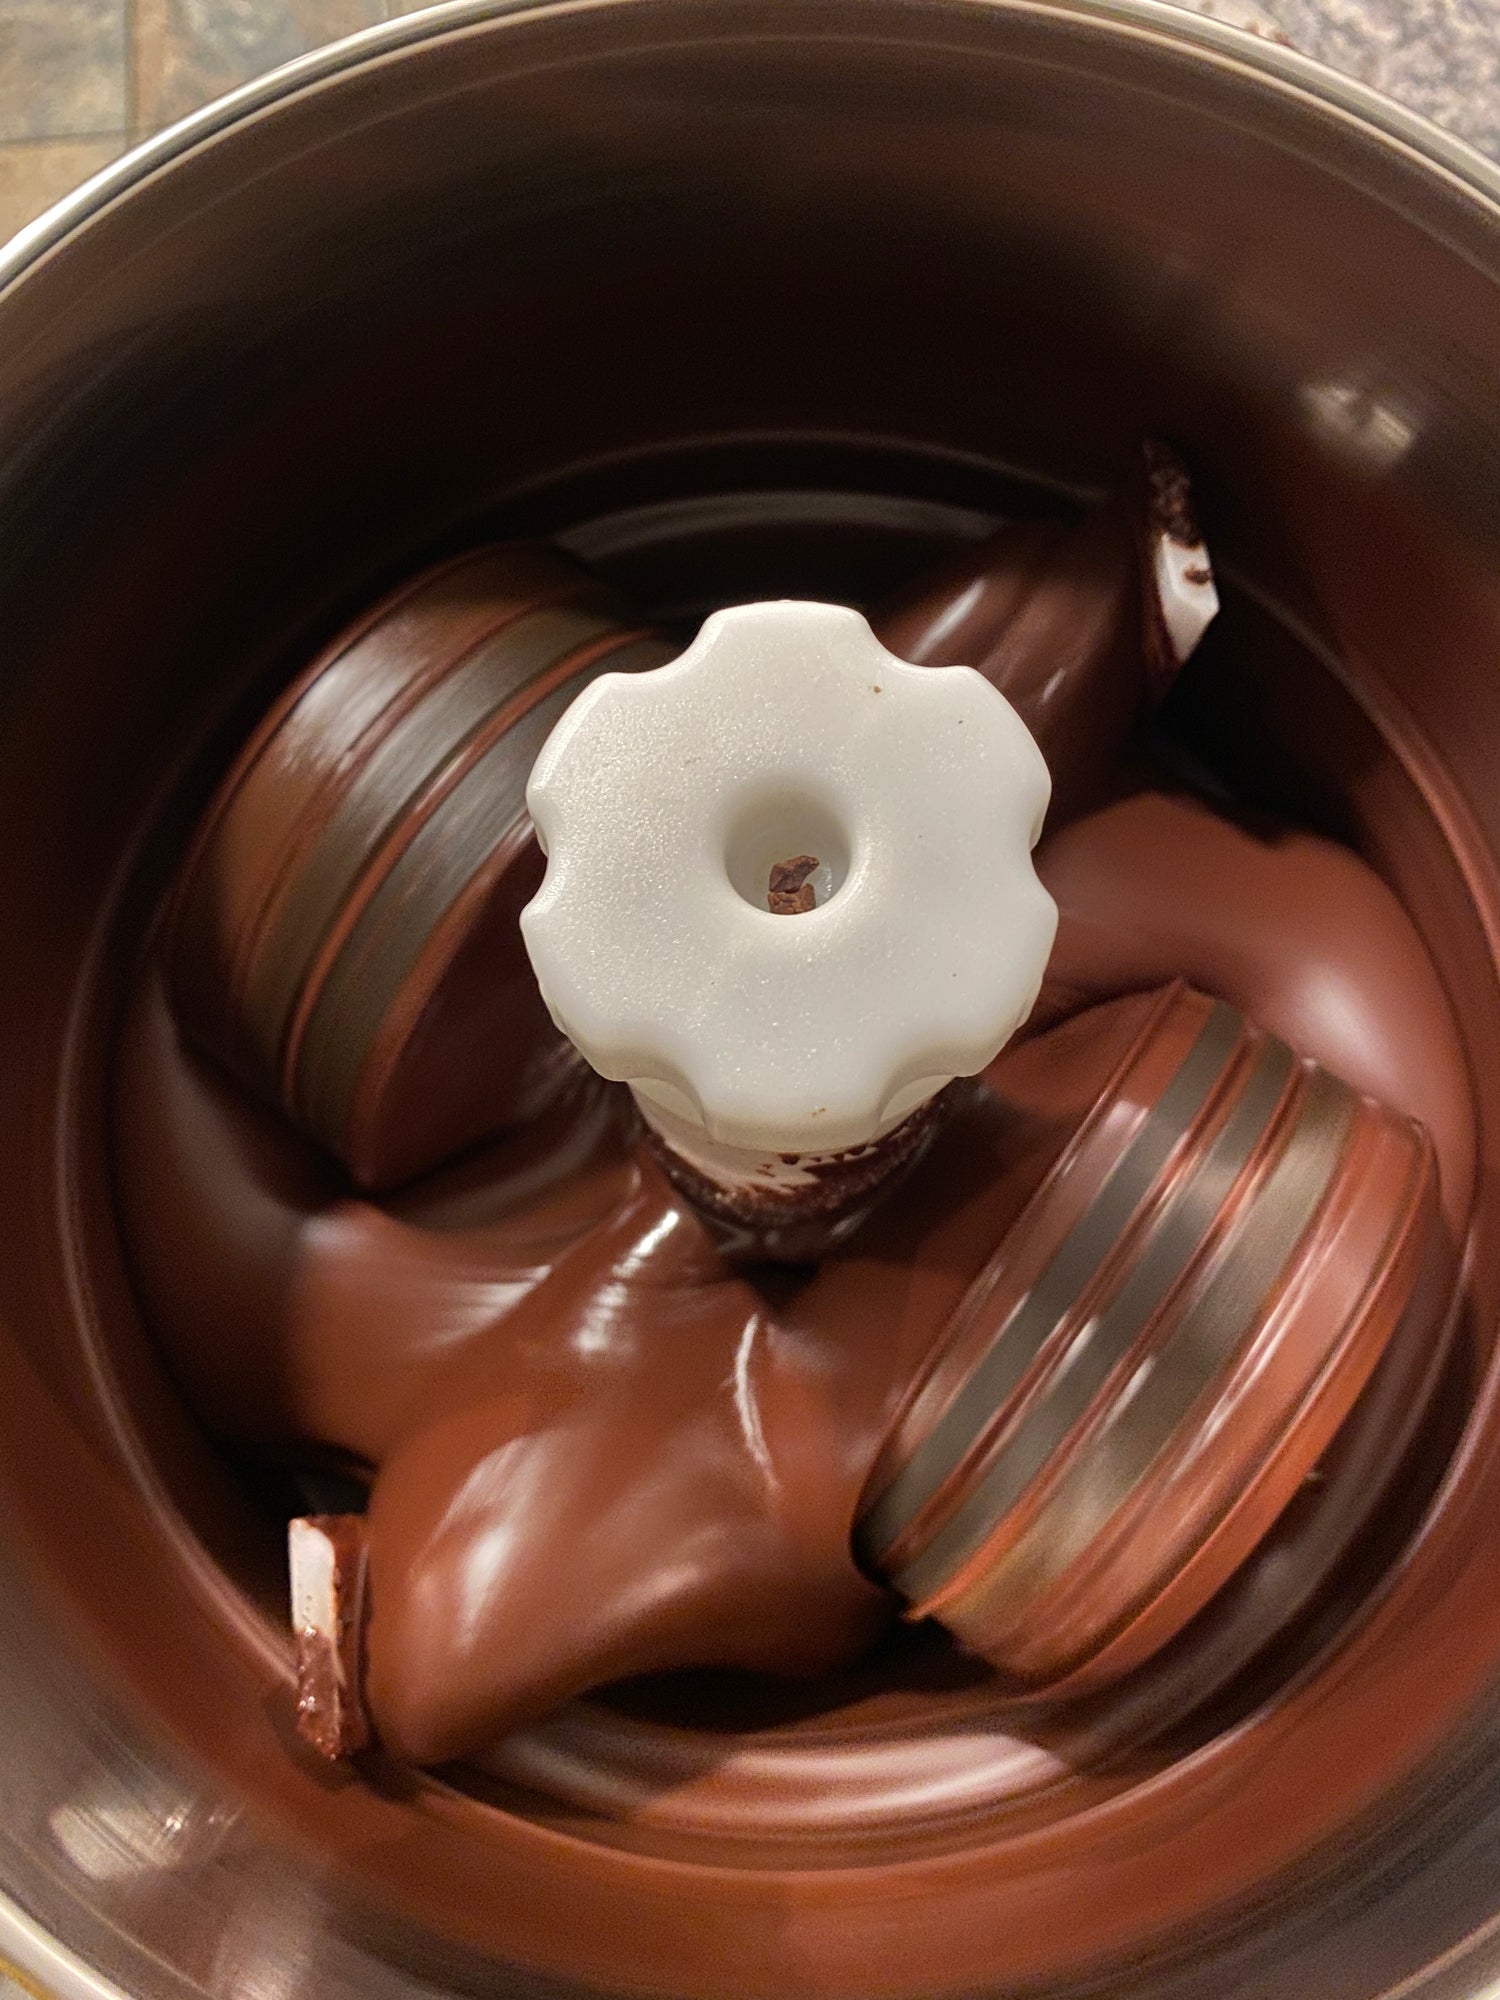 A white and chocolate swirl bundt cake sits in a rotating tin, partially coated with glossy, melting chocolate that is being evenly spread over its surface.